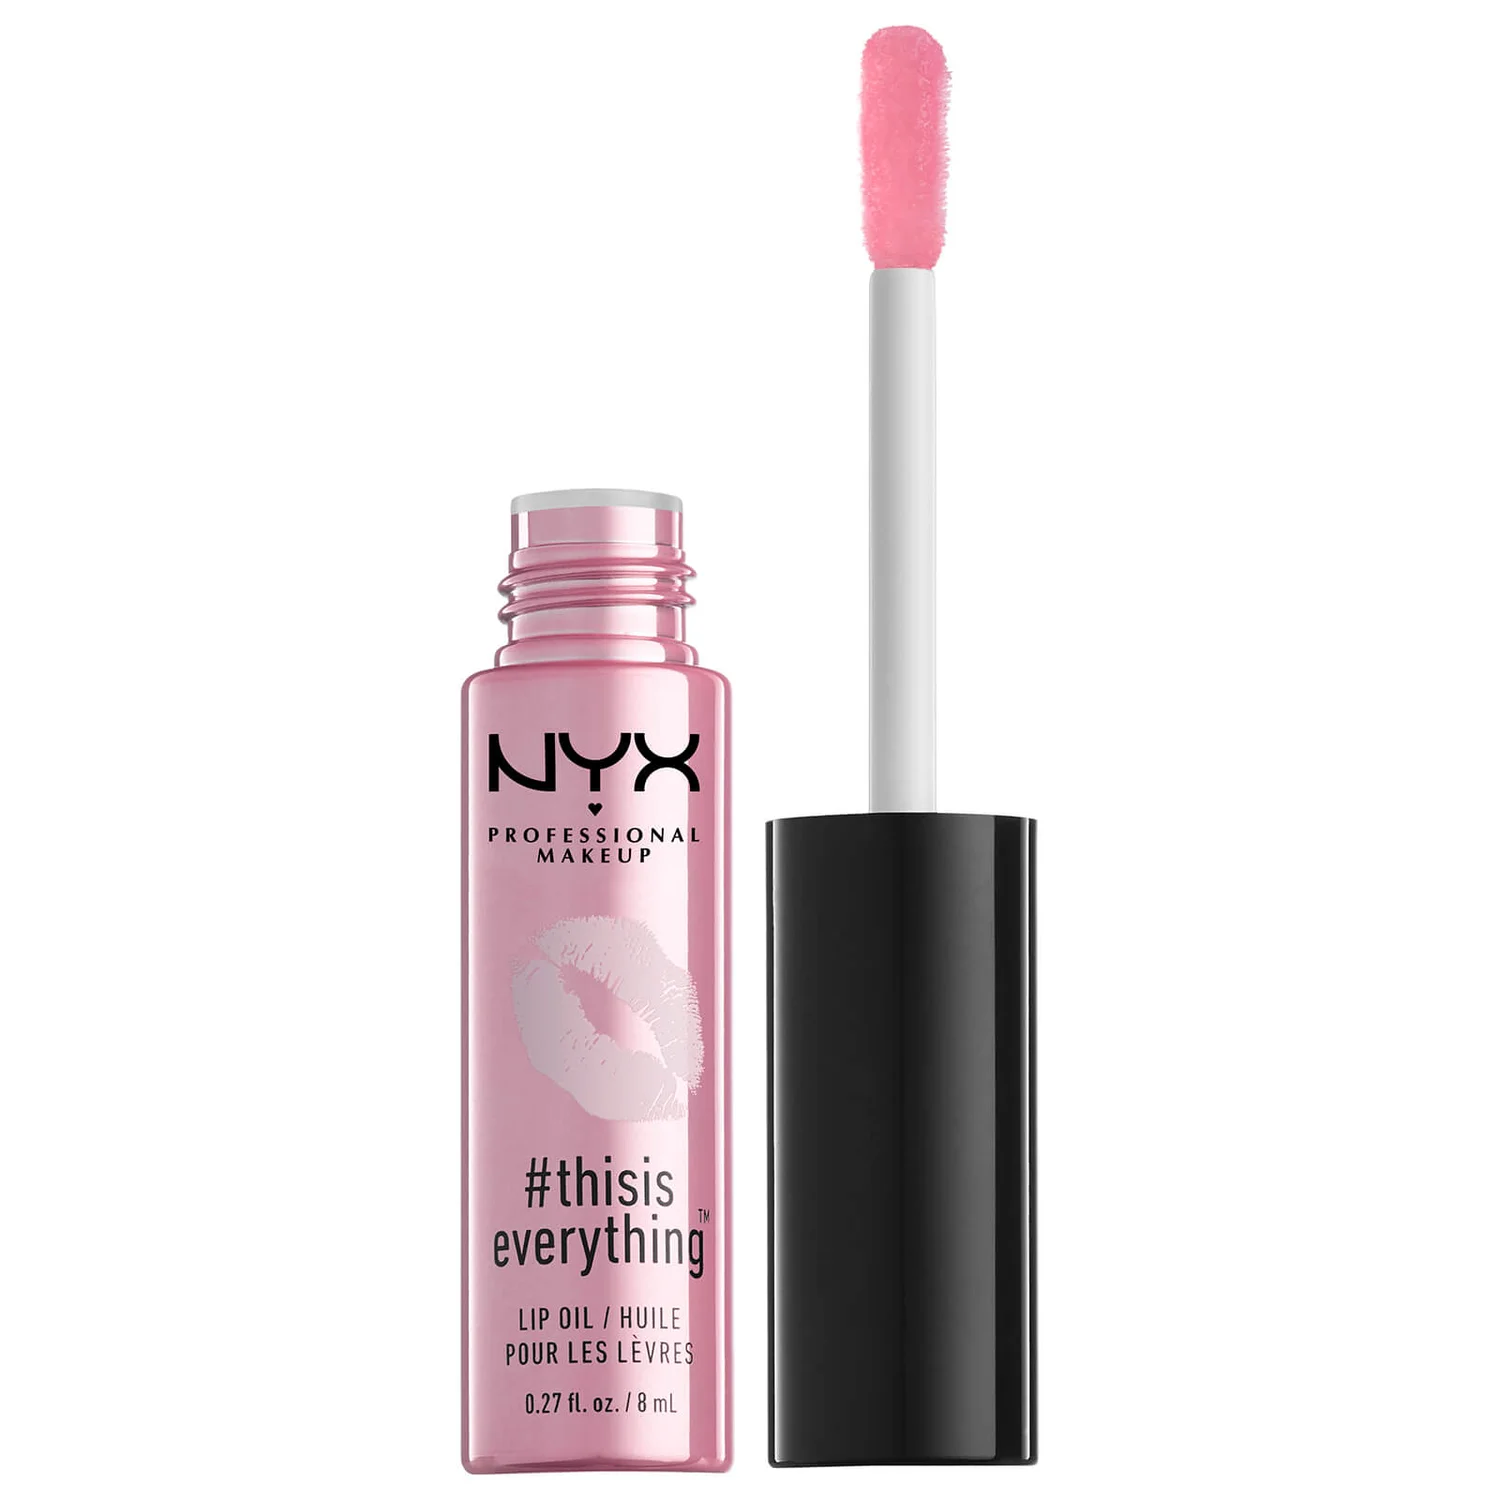 NYX Professional Makeup #THISISEVERYTHING Lip Oil £4.80